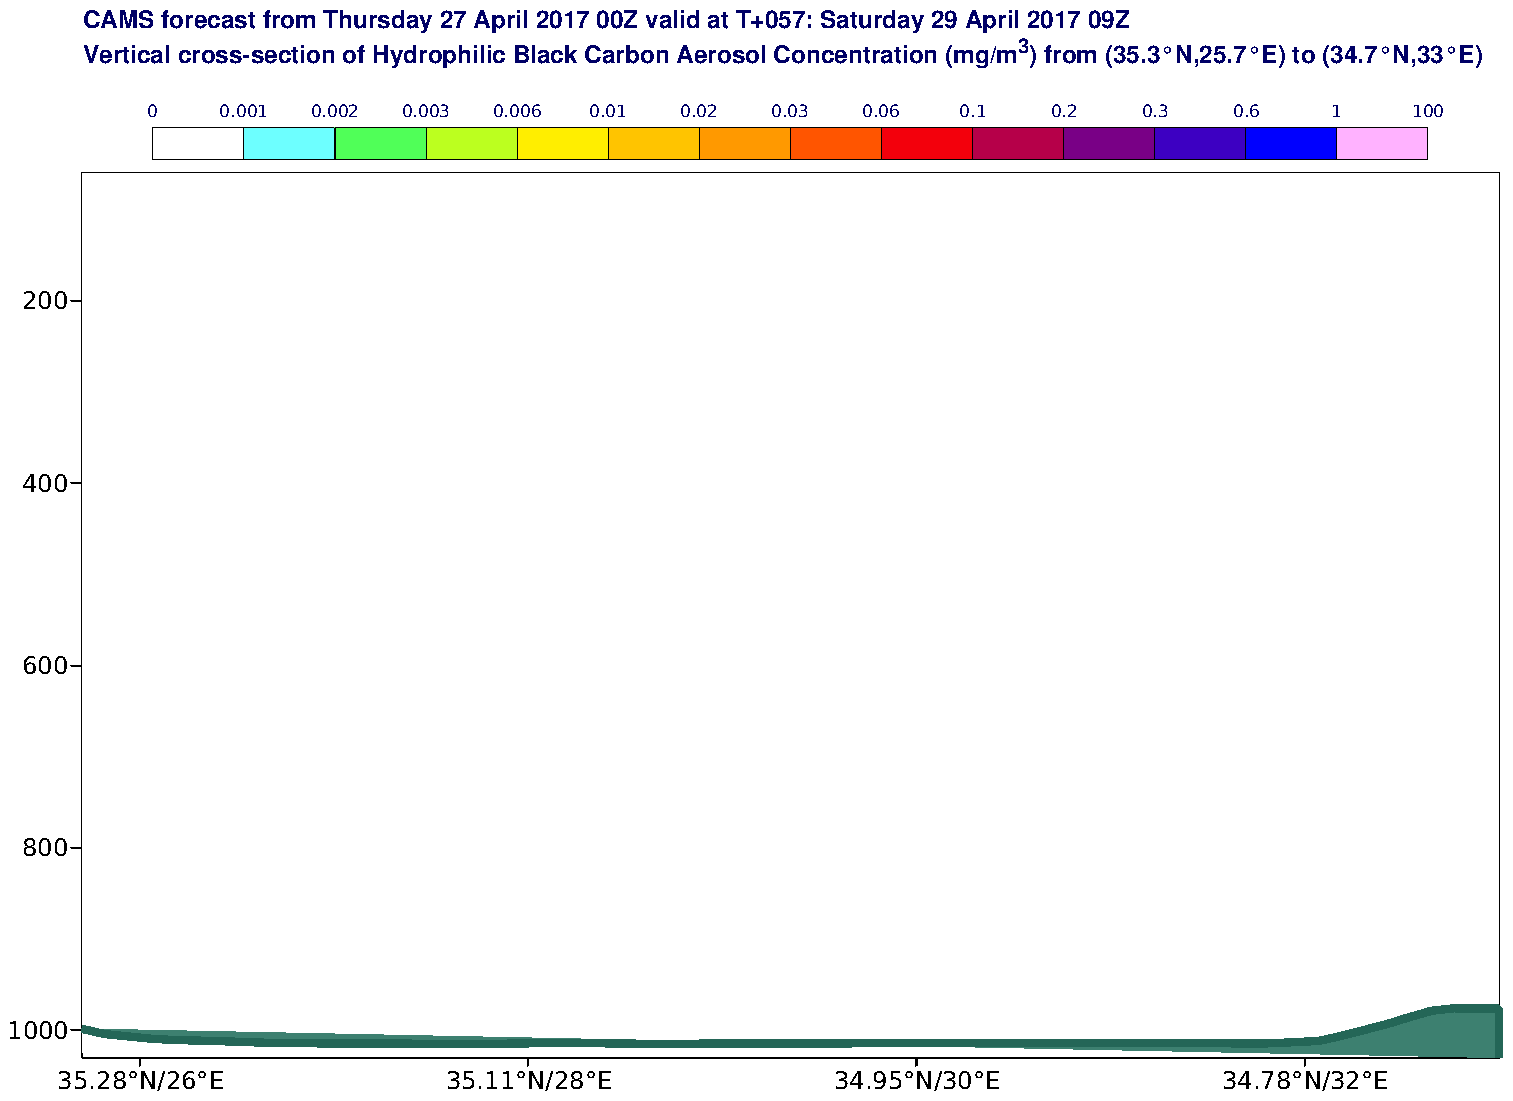 Vertical cross-section of Hydrophilic Black Carbon Aerosol Concentration (mg/m3) valid at T57 - 2017-04-29 09:00